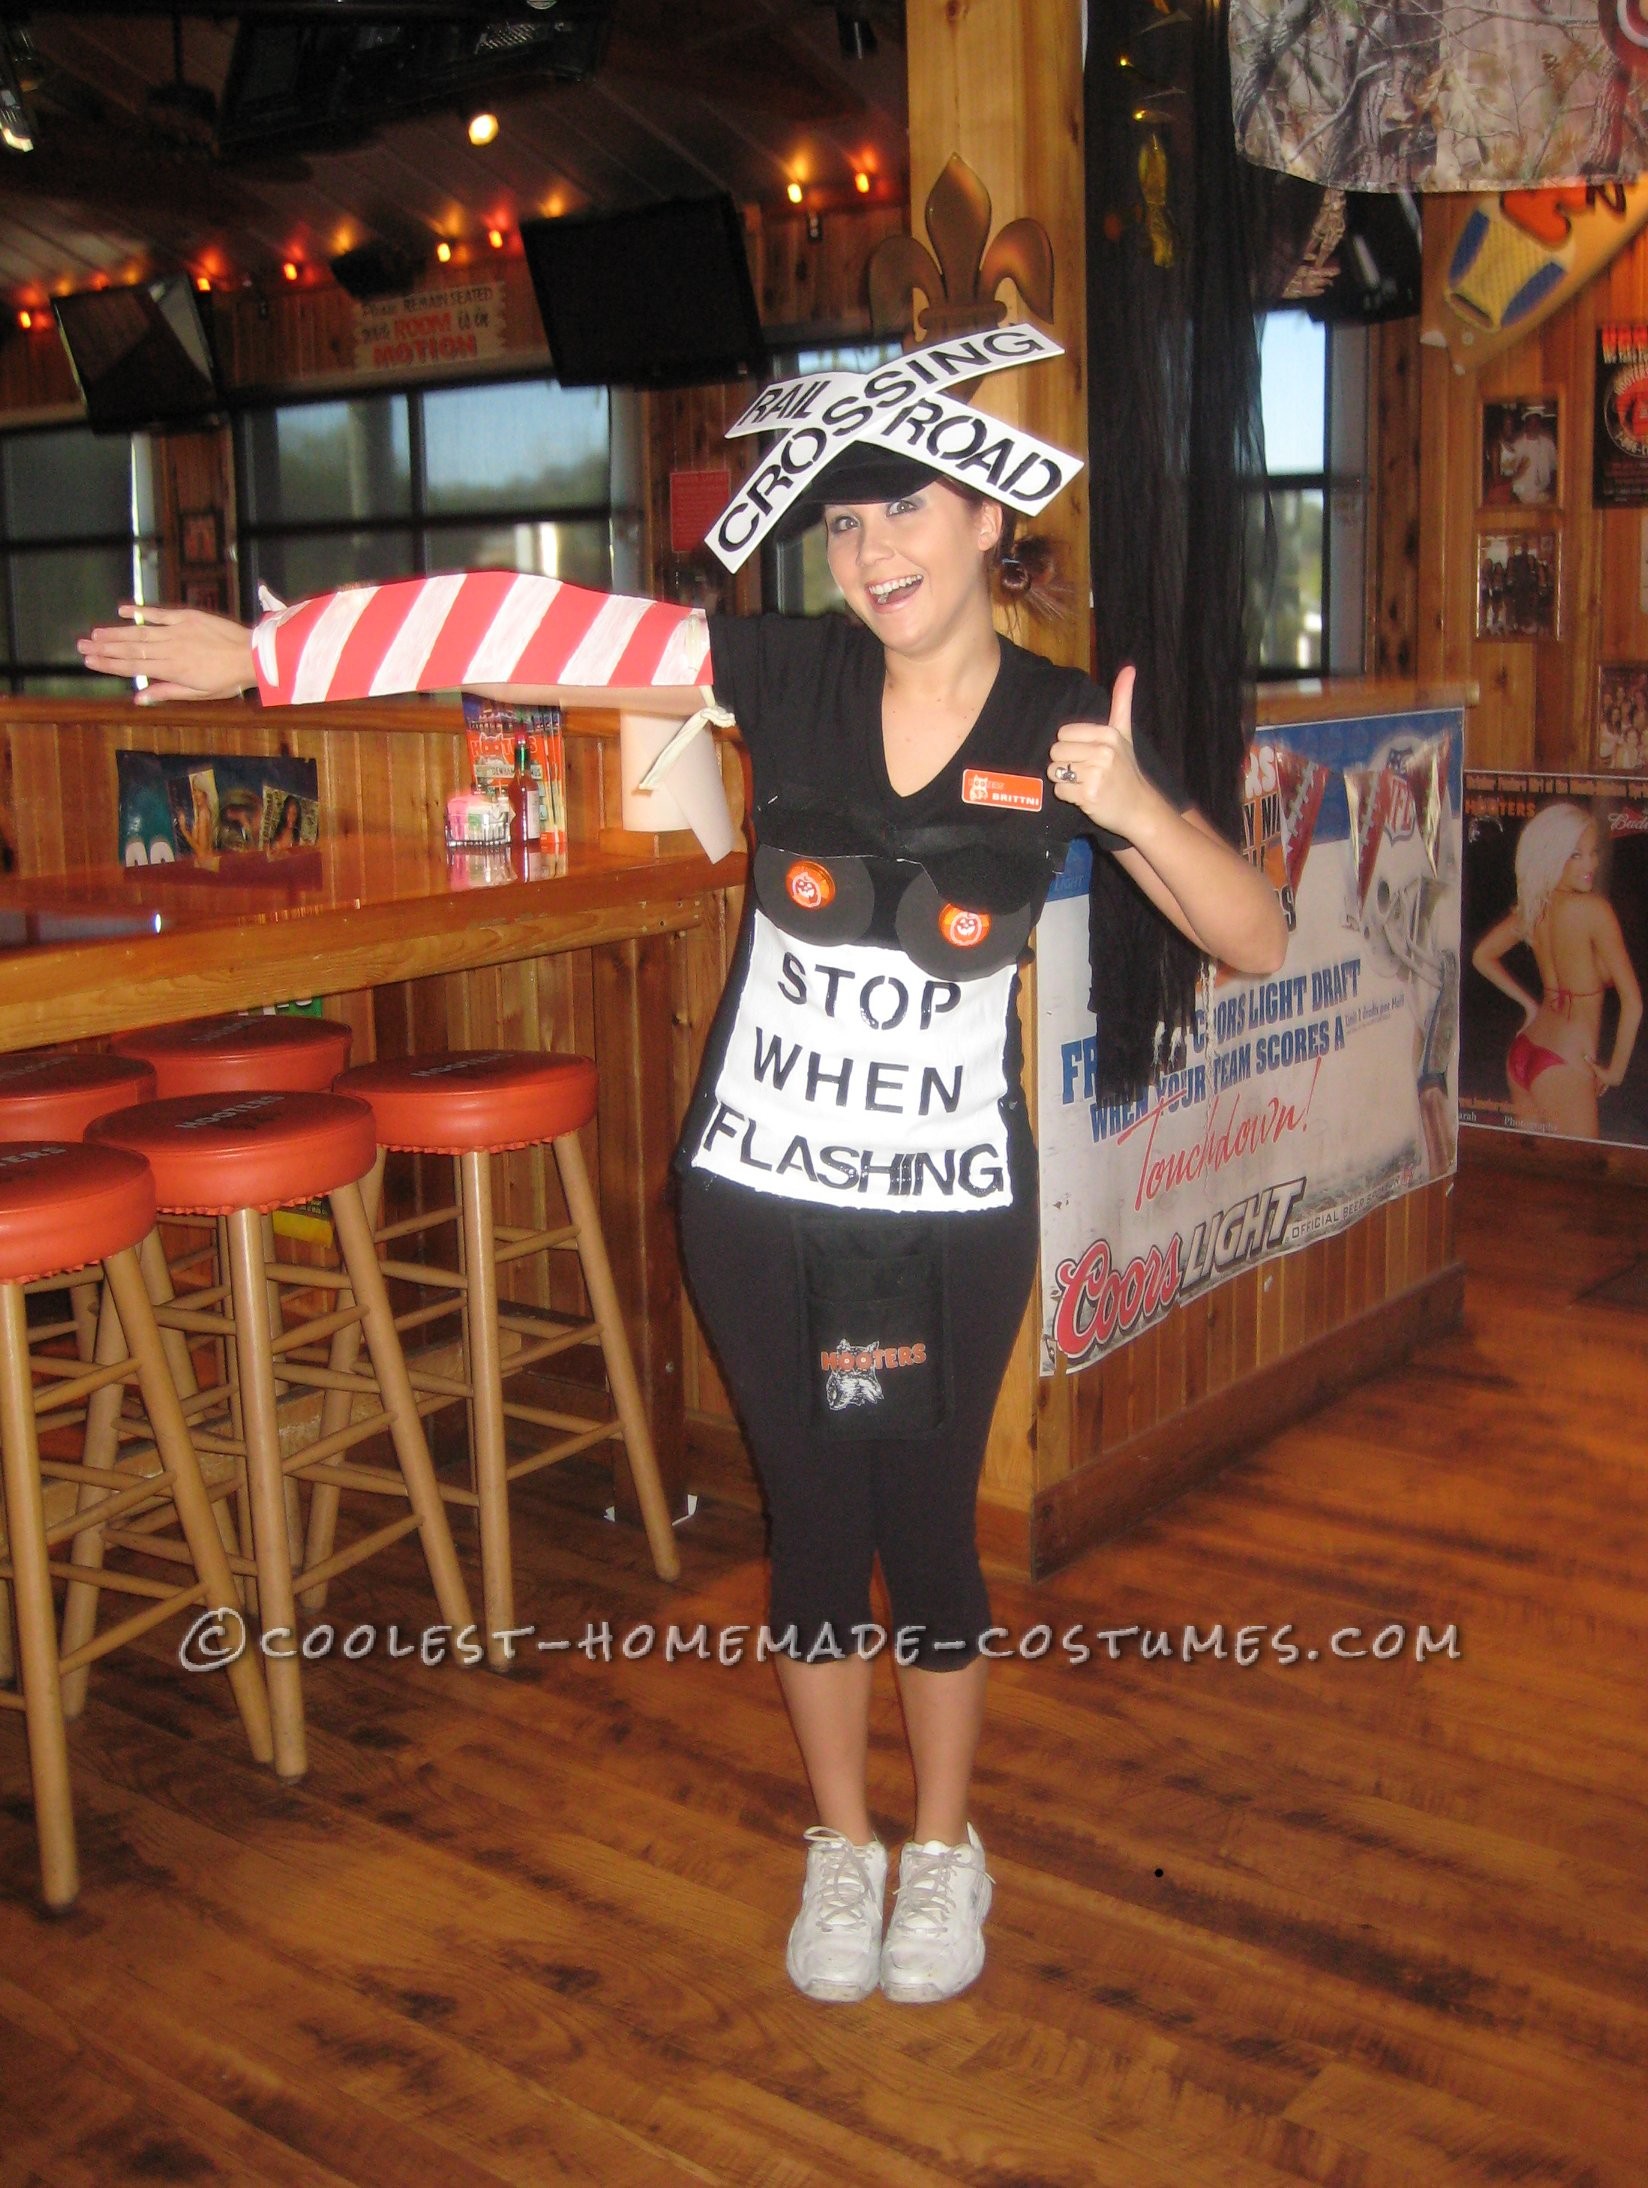 This was my favorite Halloween costume I have ever done. I work at Hooters and all the girls always wear skimpy outfits so I wanted to change it up a